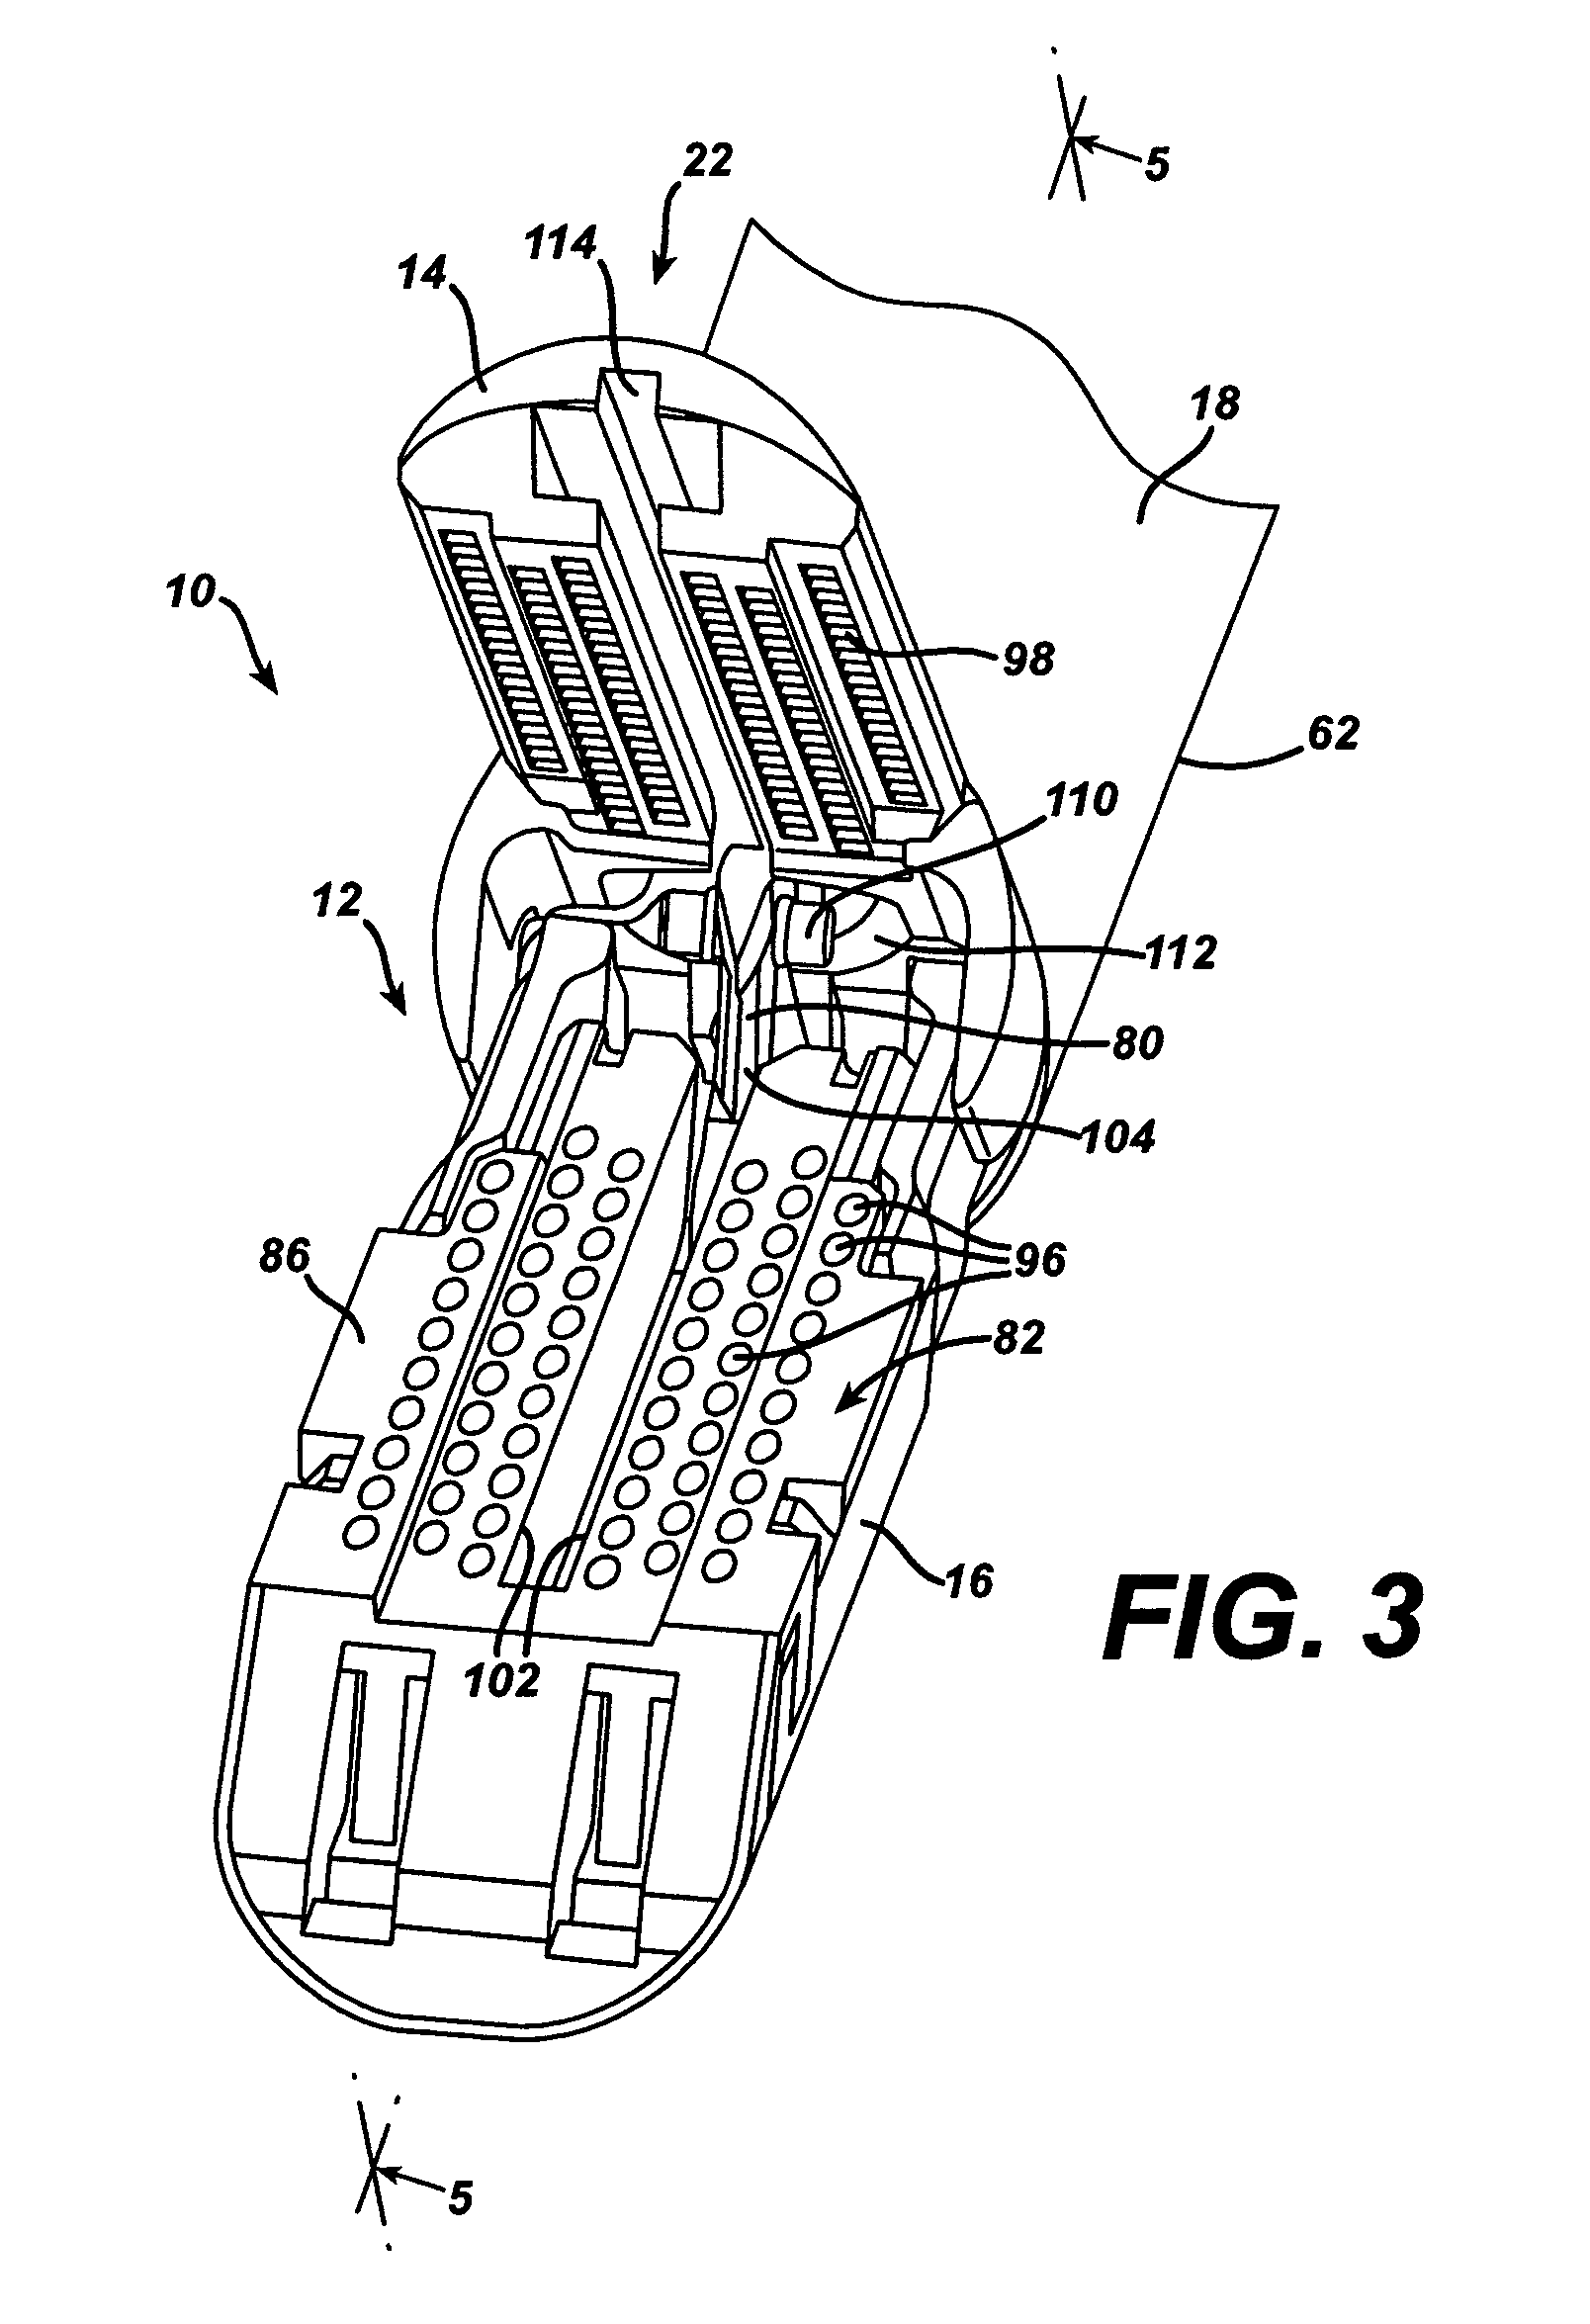 Surgical stapling instrument incorporating a multi-stroke firing mechanism with return spring rotary manual retraction system